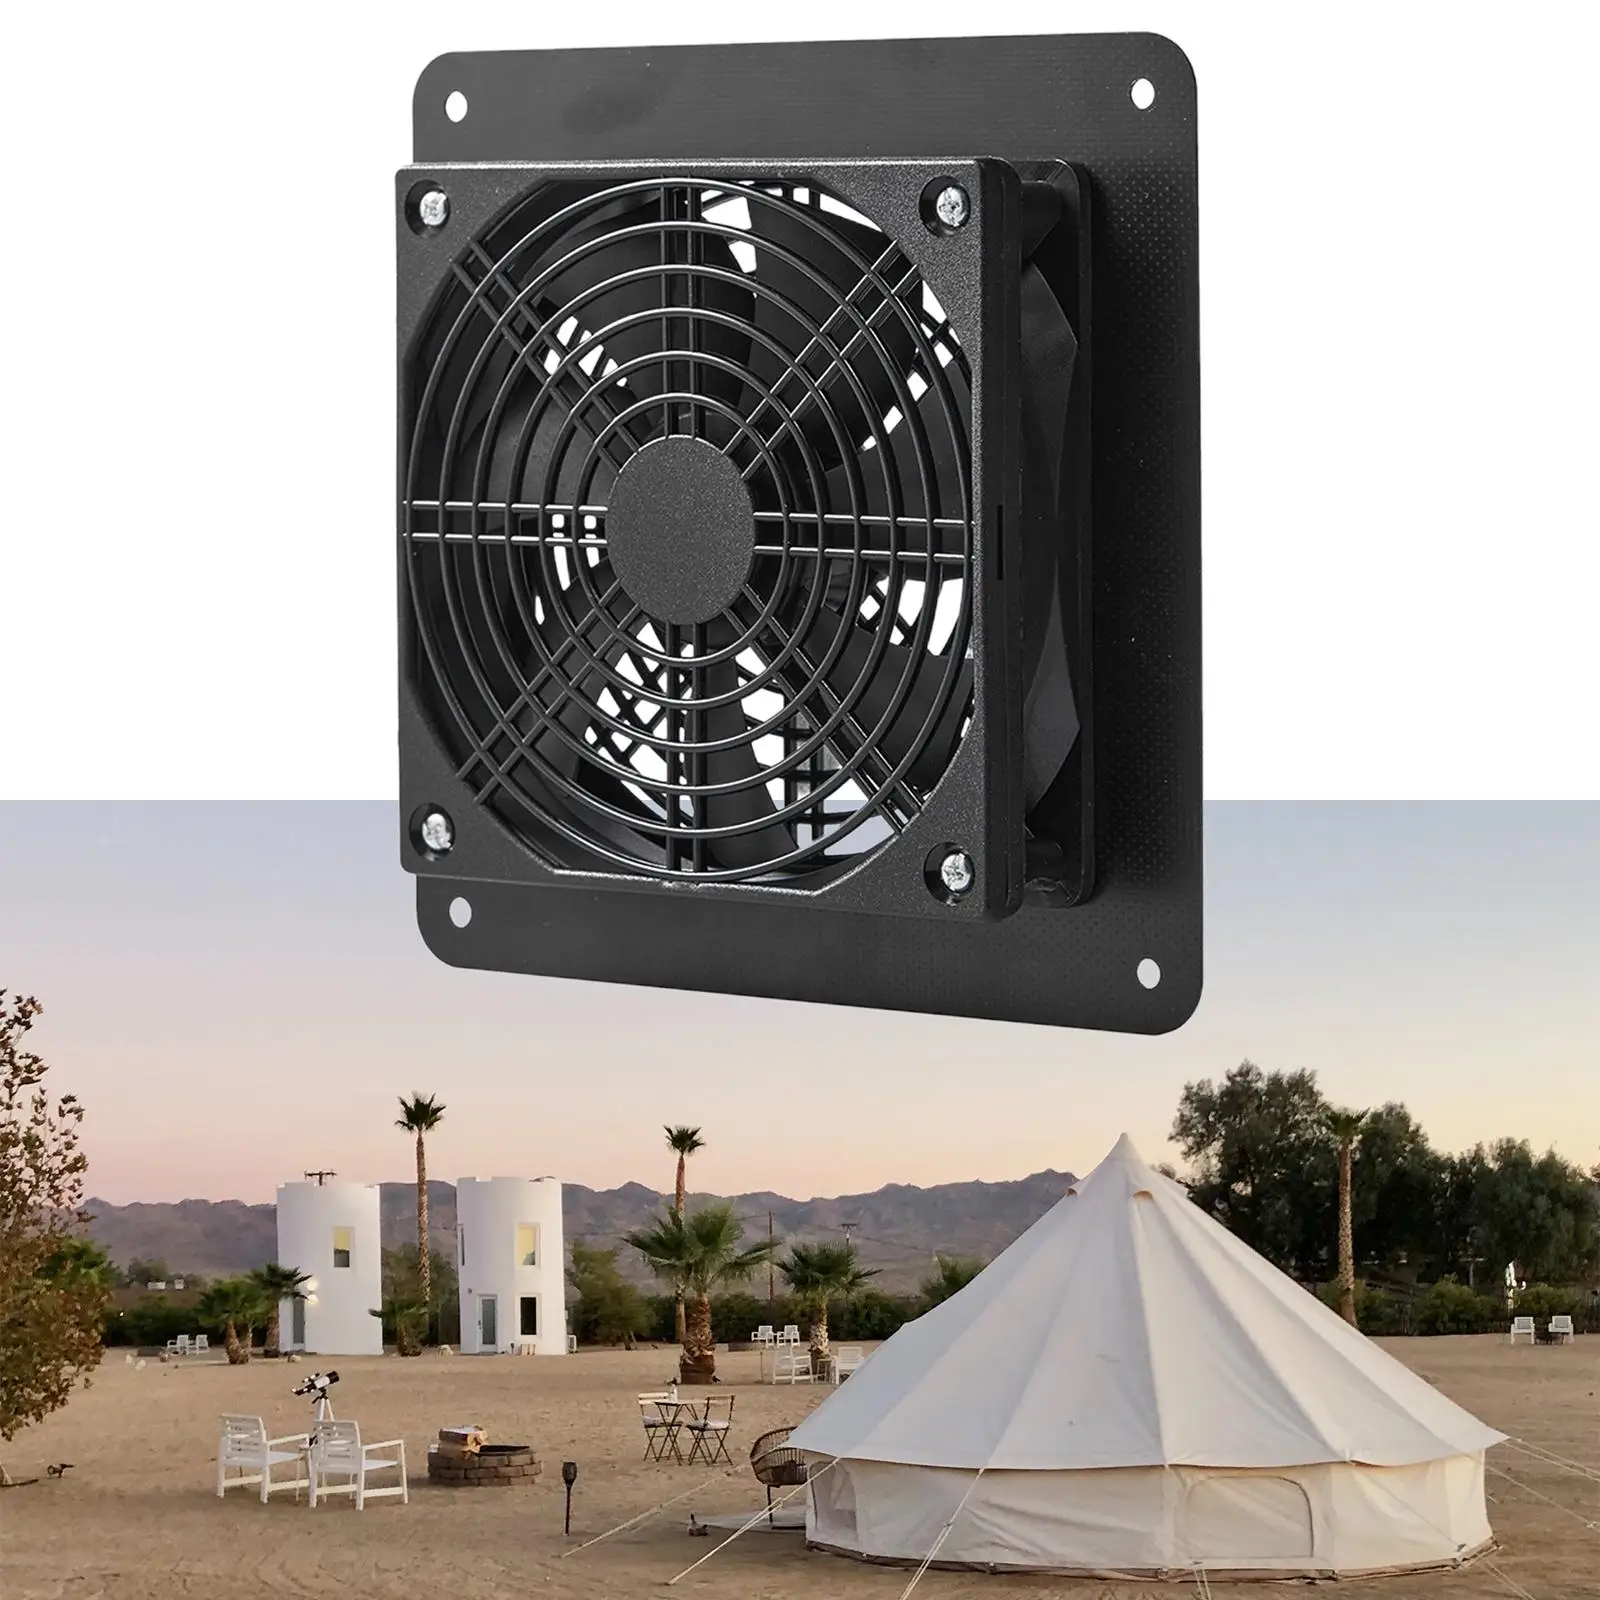 Ventilator Fans Portable Square Blower Free Energy for Sheds Office